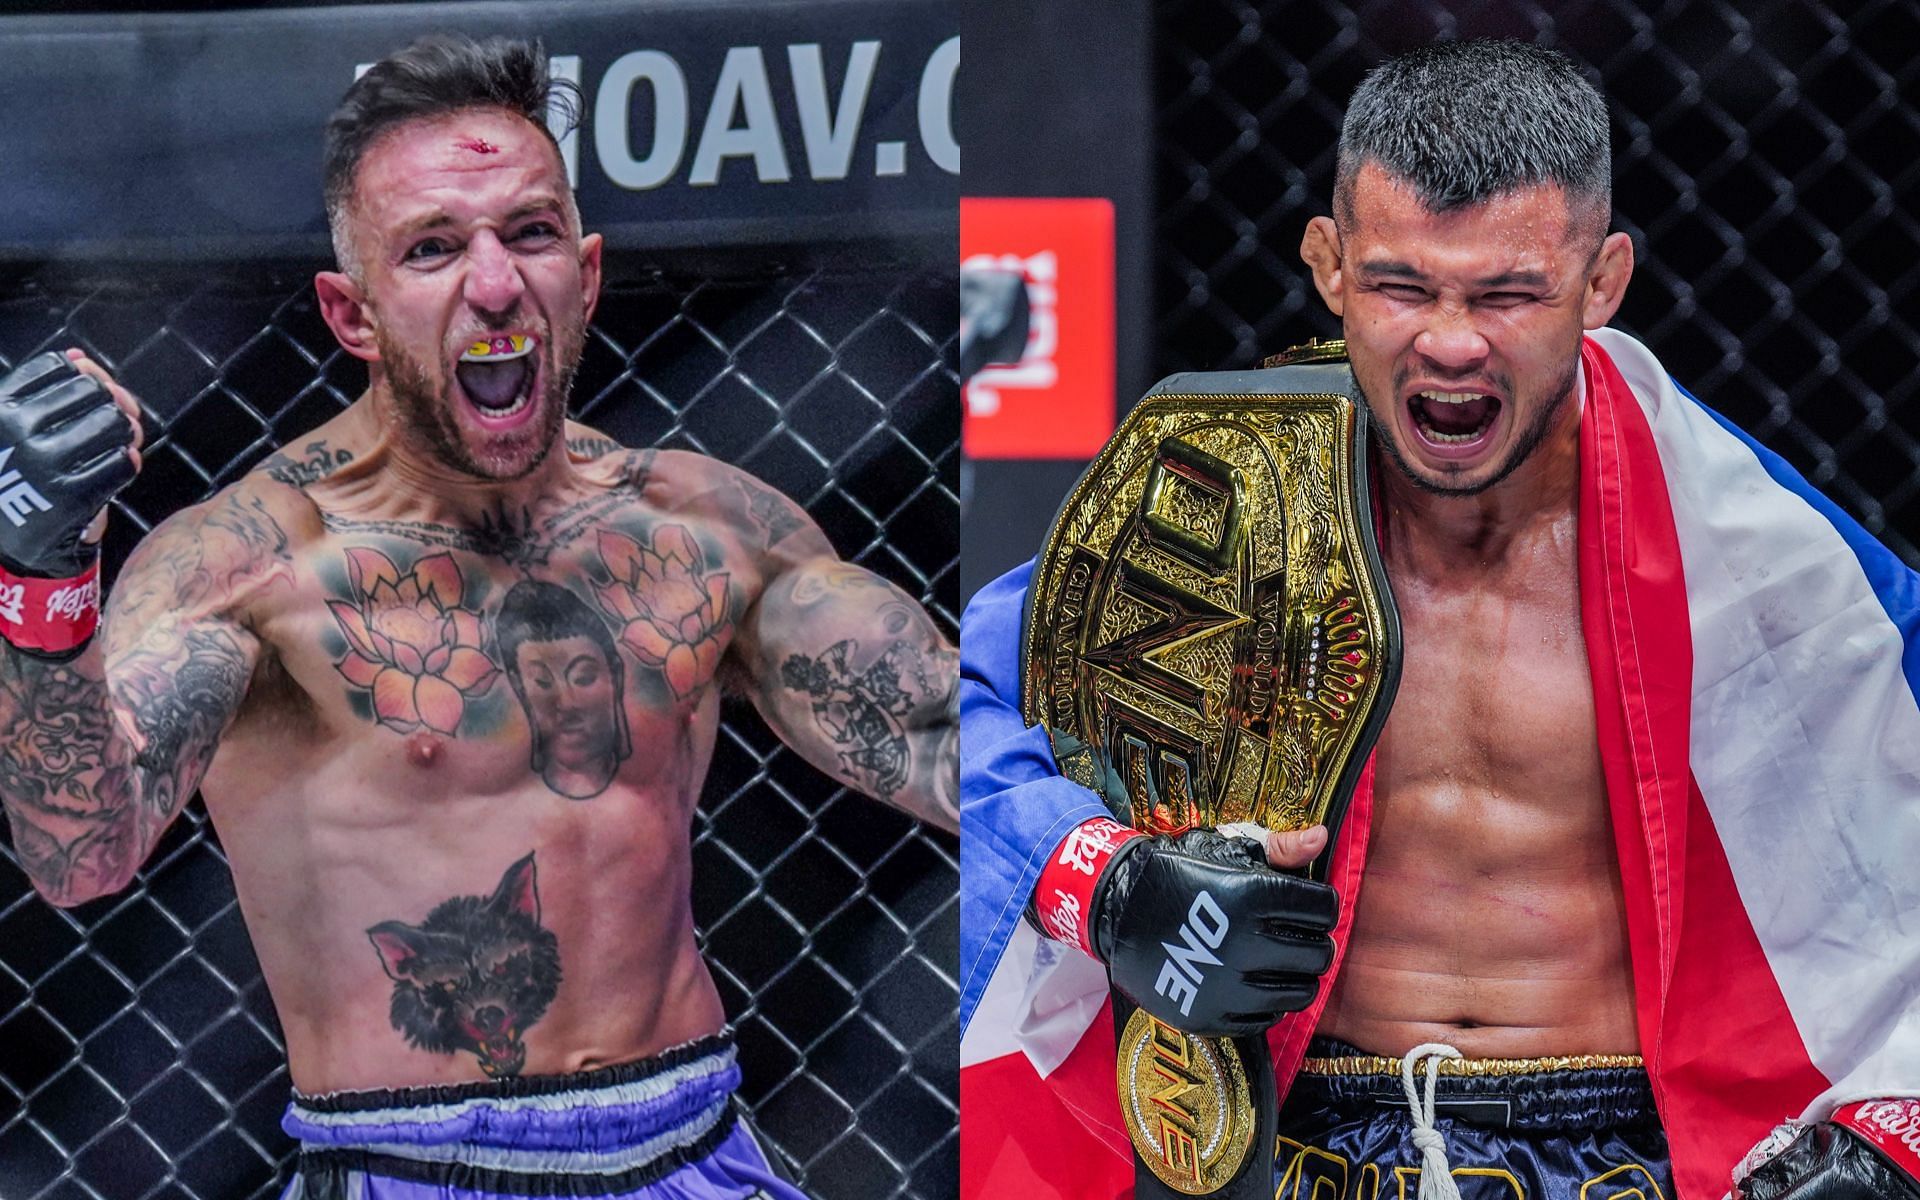 Liam Harrison (left) plans to defend the ONE bantamweight Muay Thai world title in England if he beats Nong-O Gaiyanghadao (right) in their match. [Photos ONE Championship]